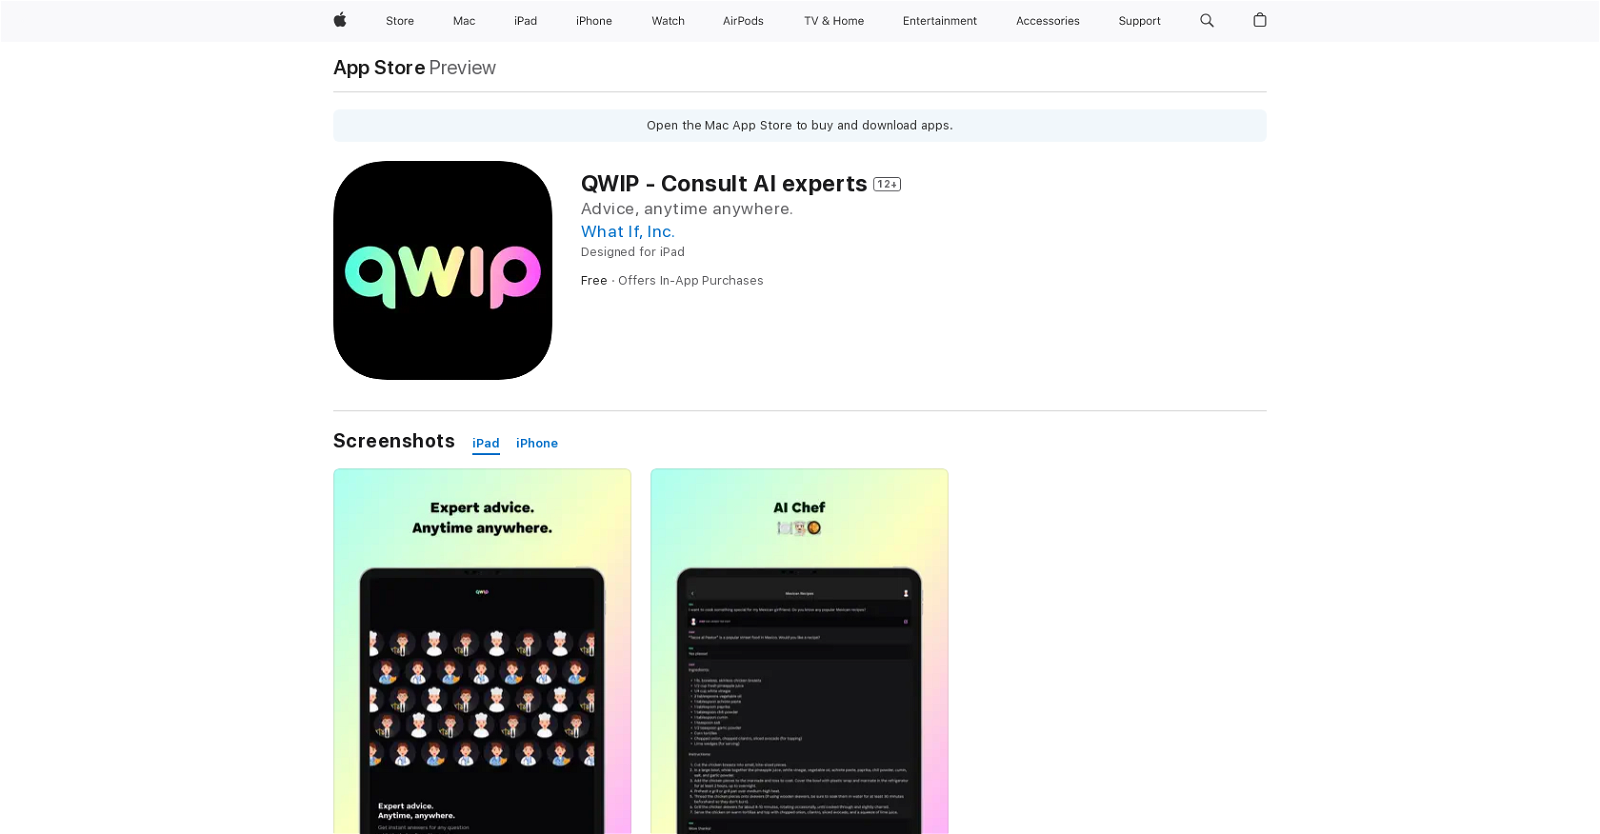 QWIP - Consult AI experts